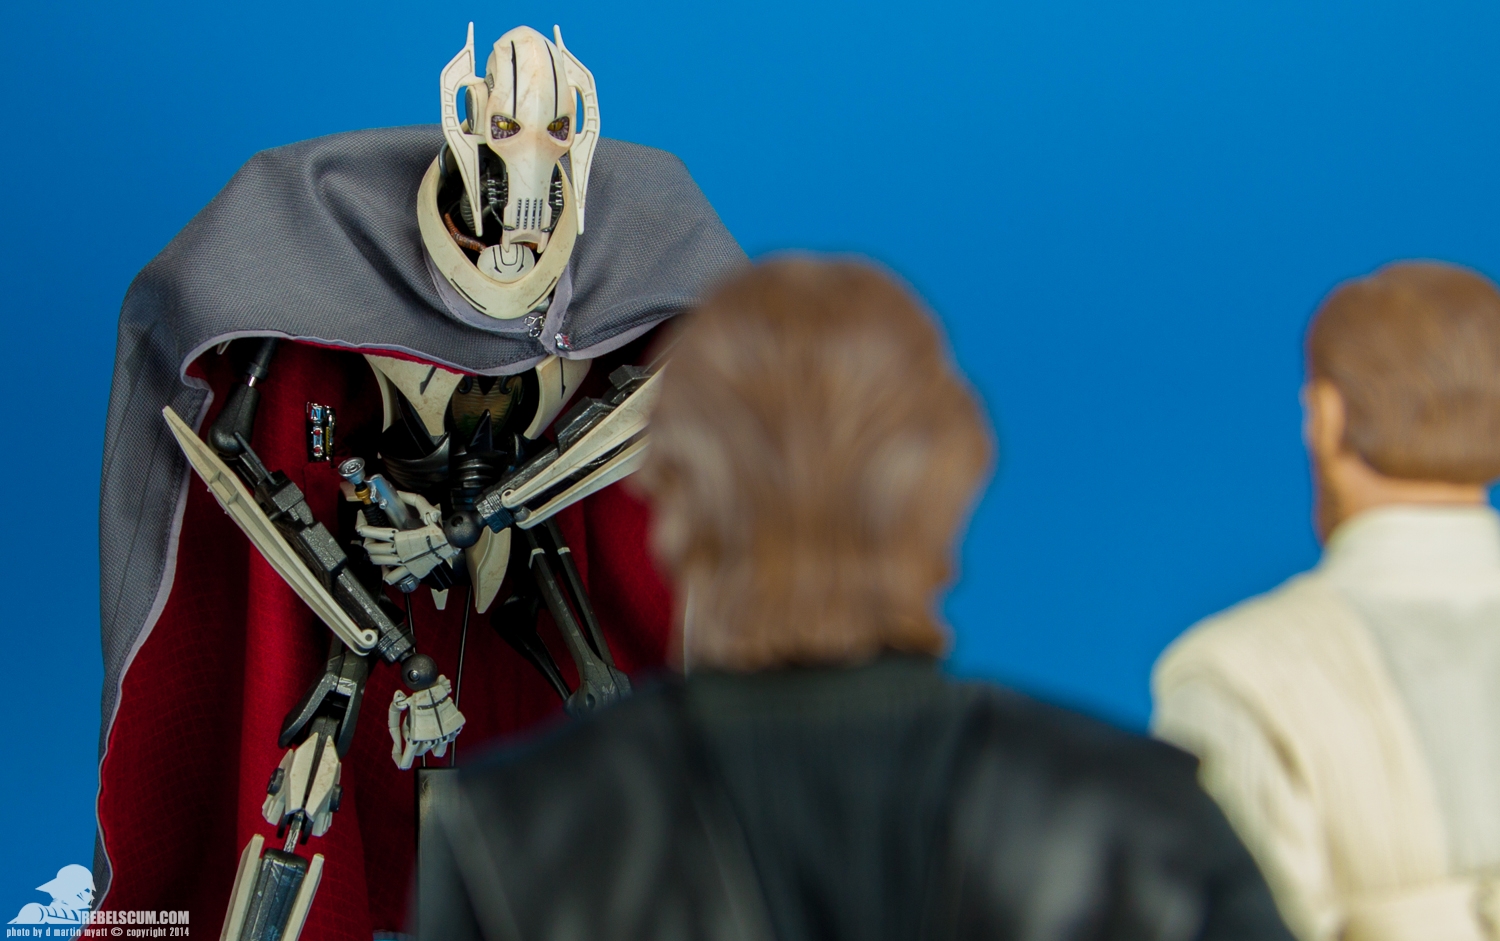 General-Grievous-Sixth-Scale-Figure-Sideshow-Collectibles-027.jpg